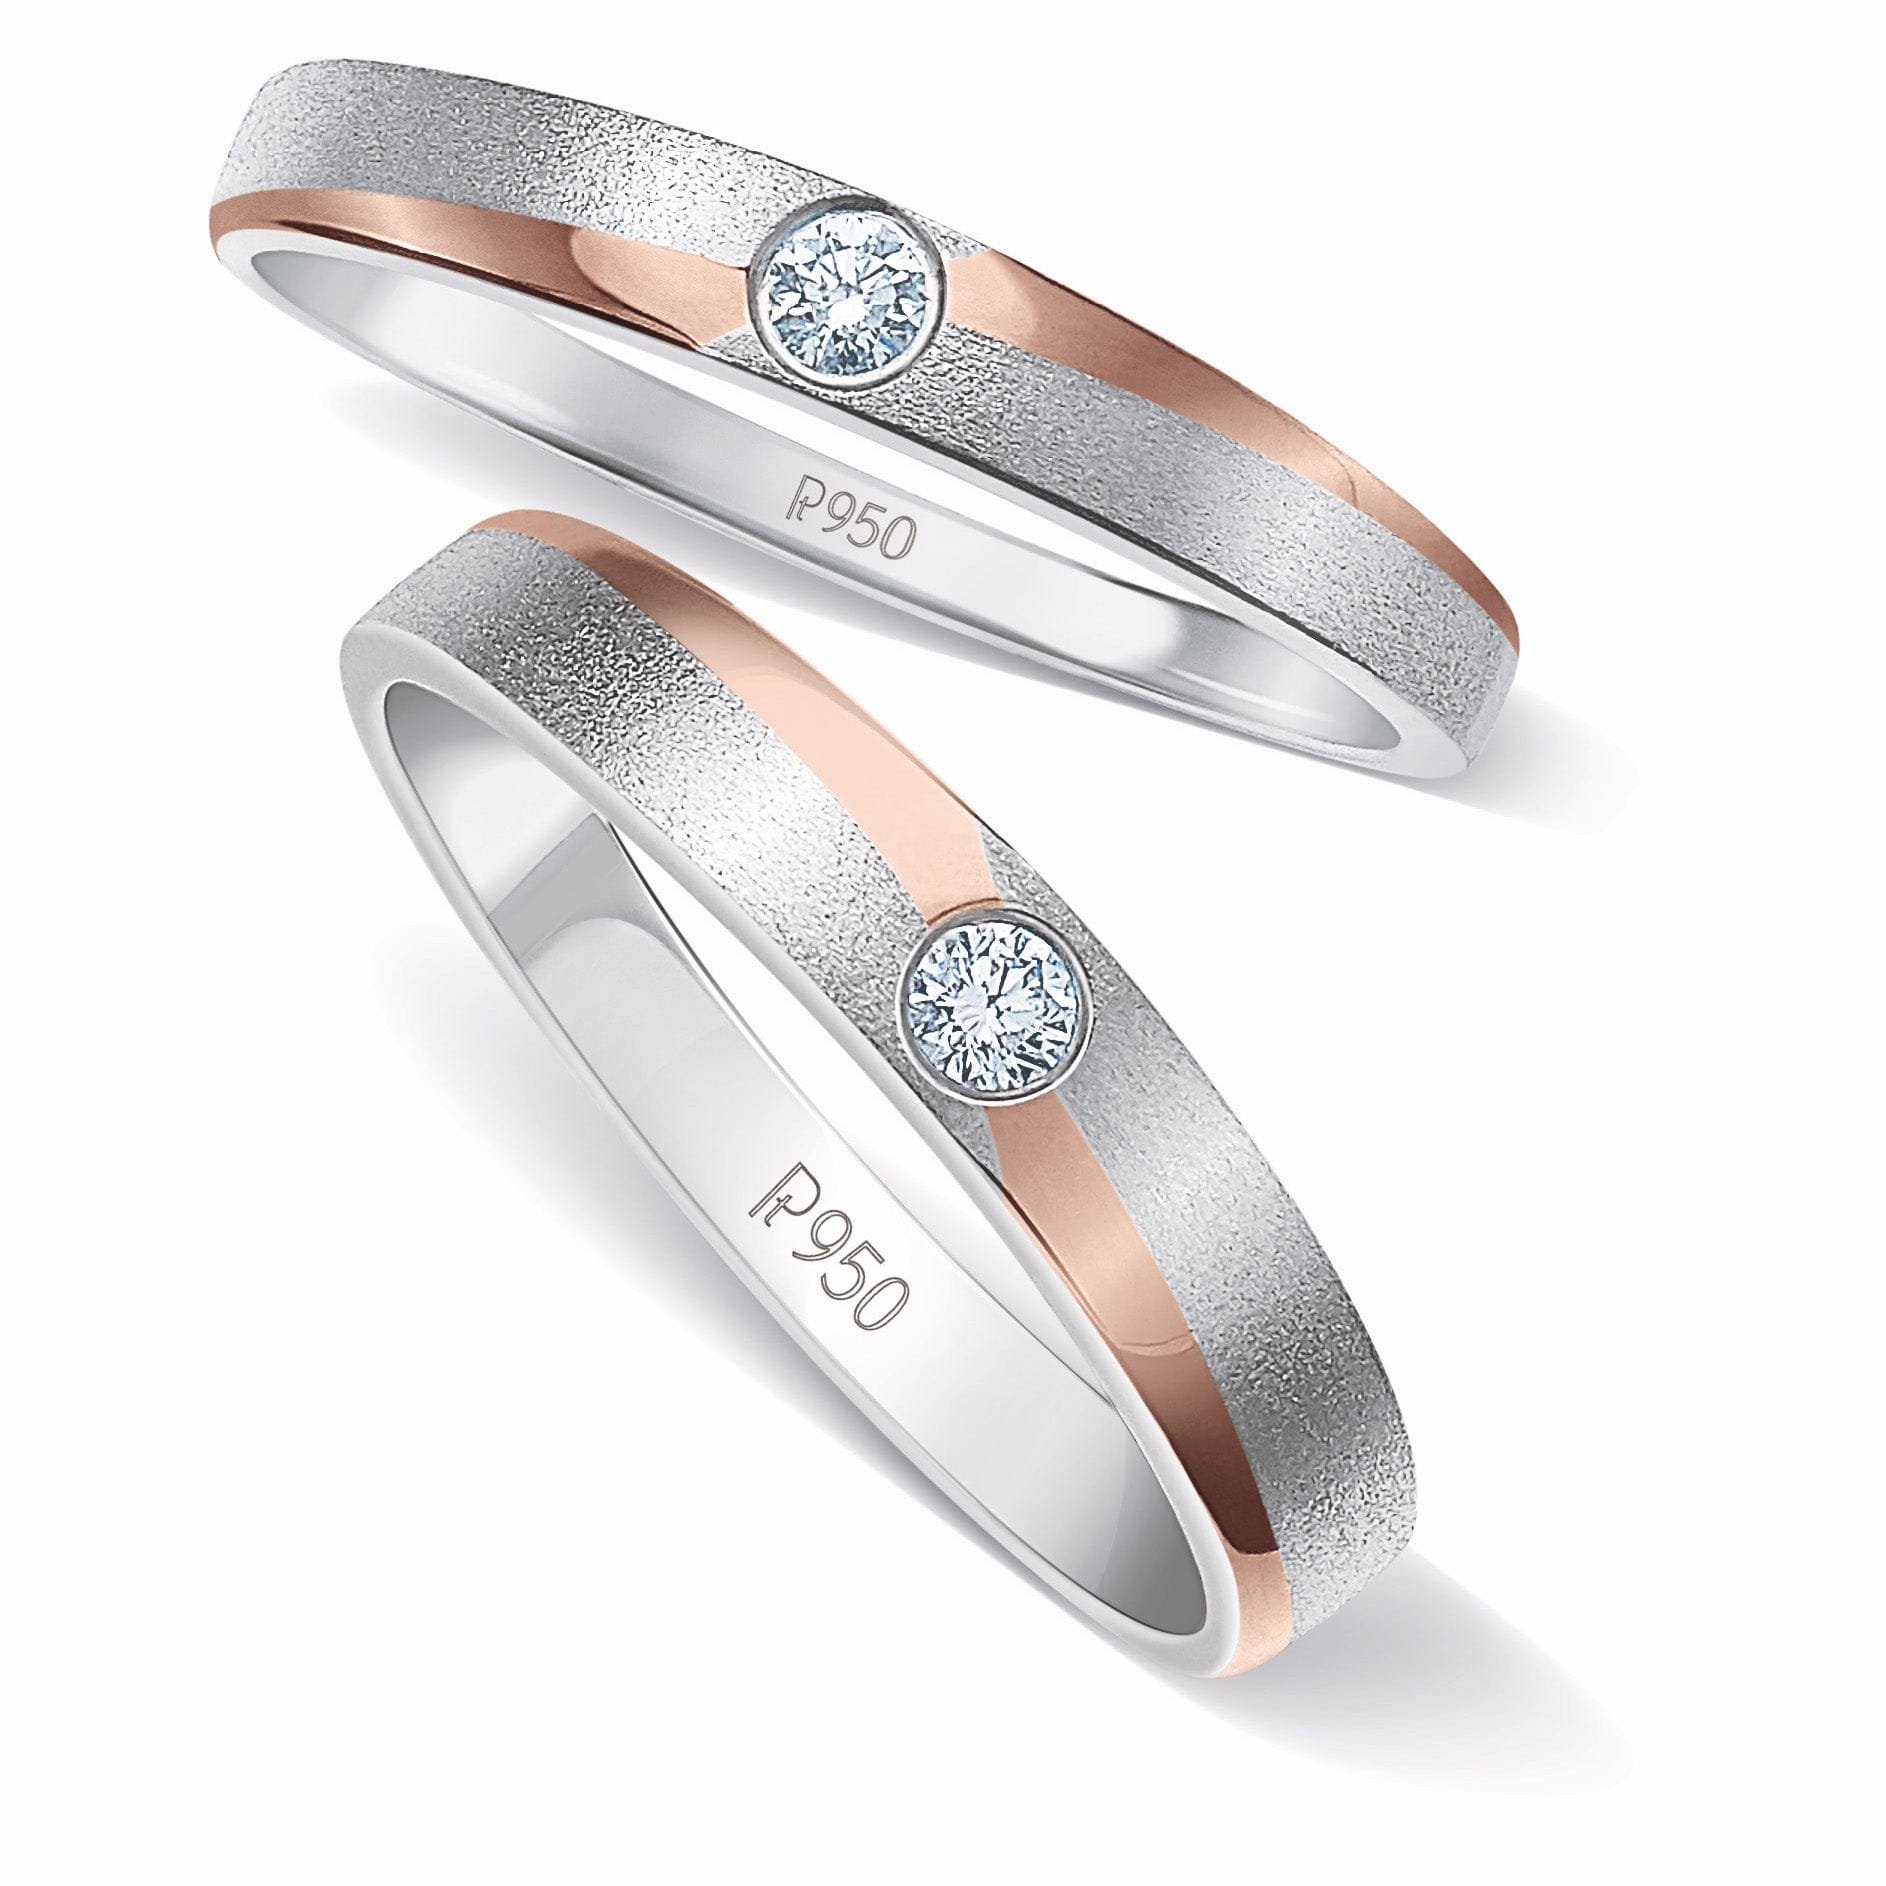 Choosing the Perfect Wedding Rings for Same-Sex Couples